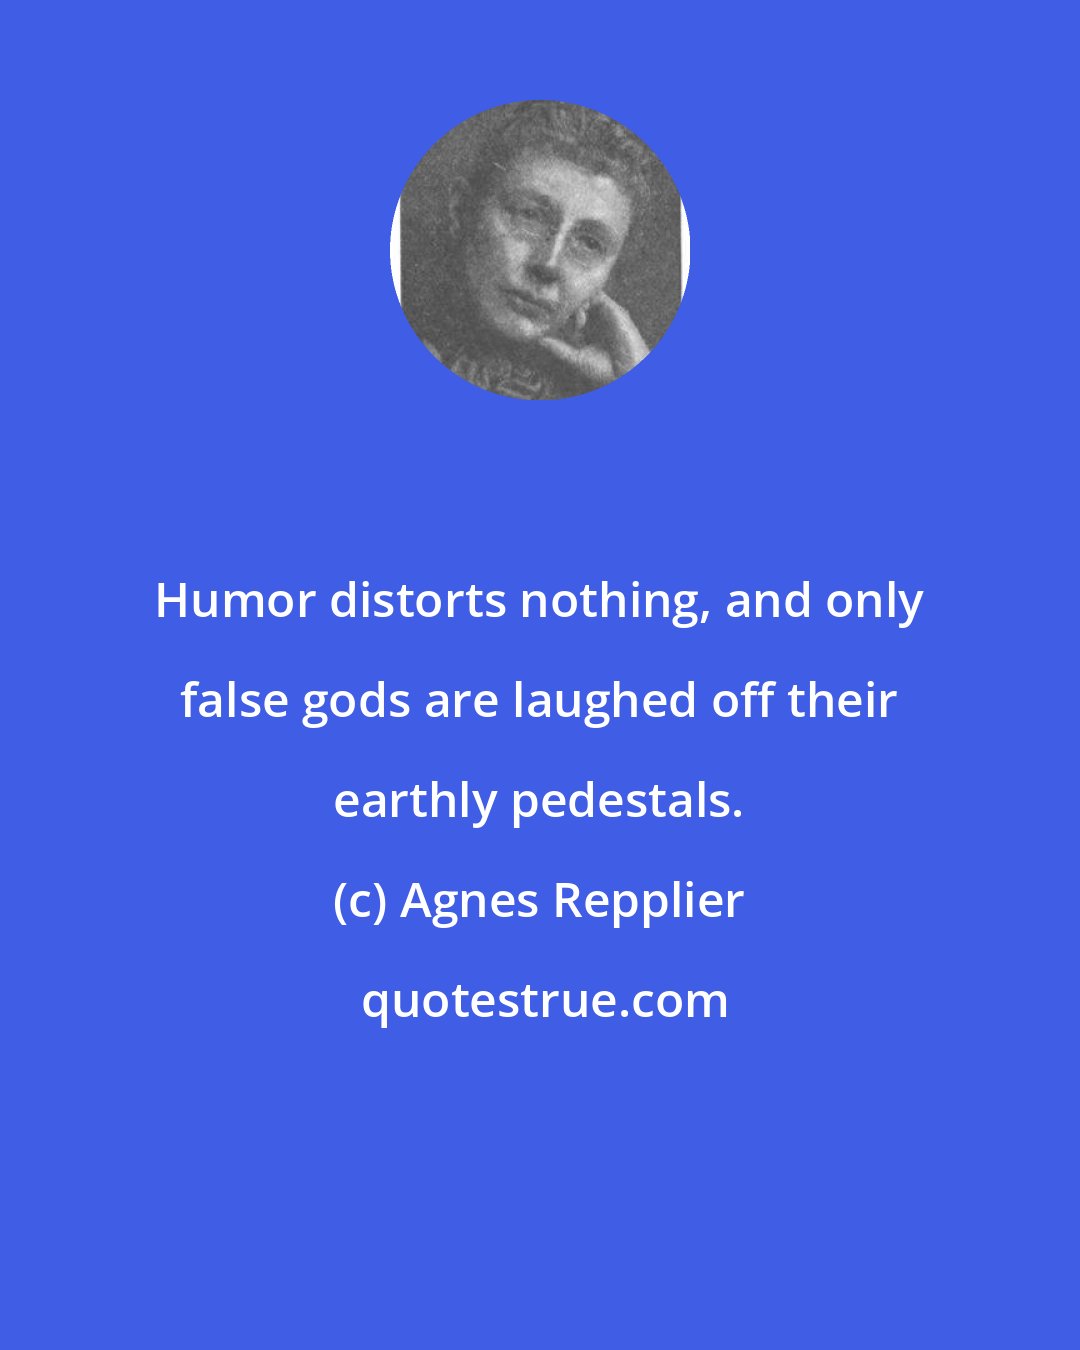 Agnes Repplier: Humor distorts nothing, and only false gods are laughed off their earthly pedestals.